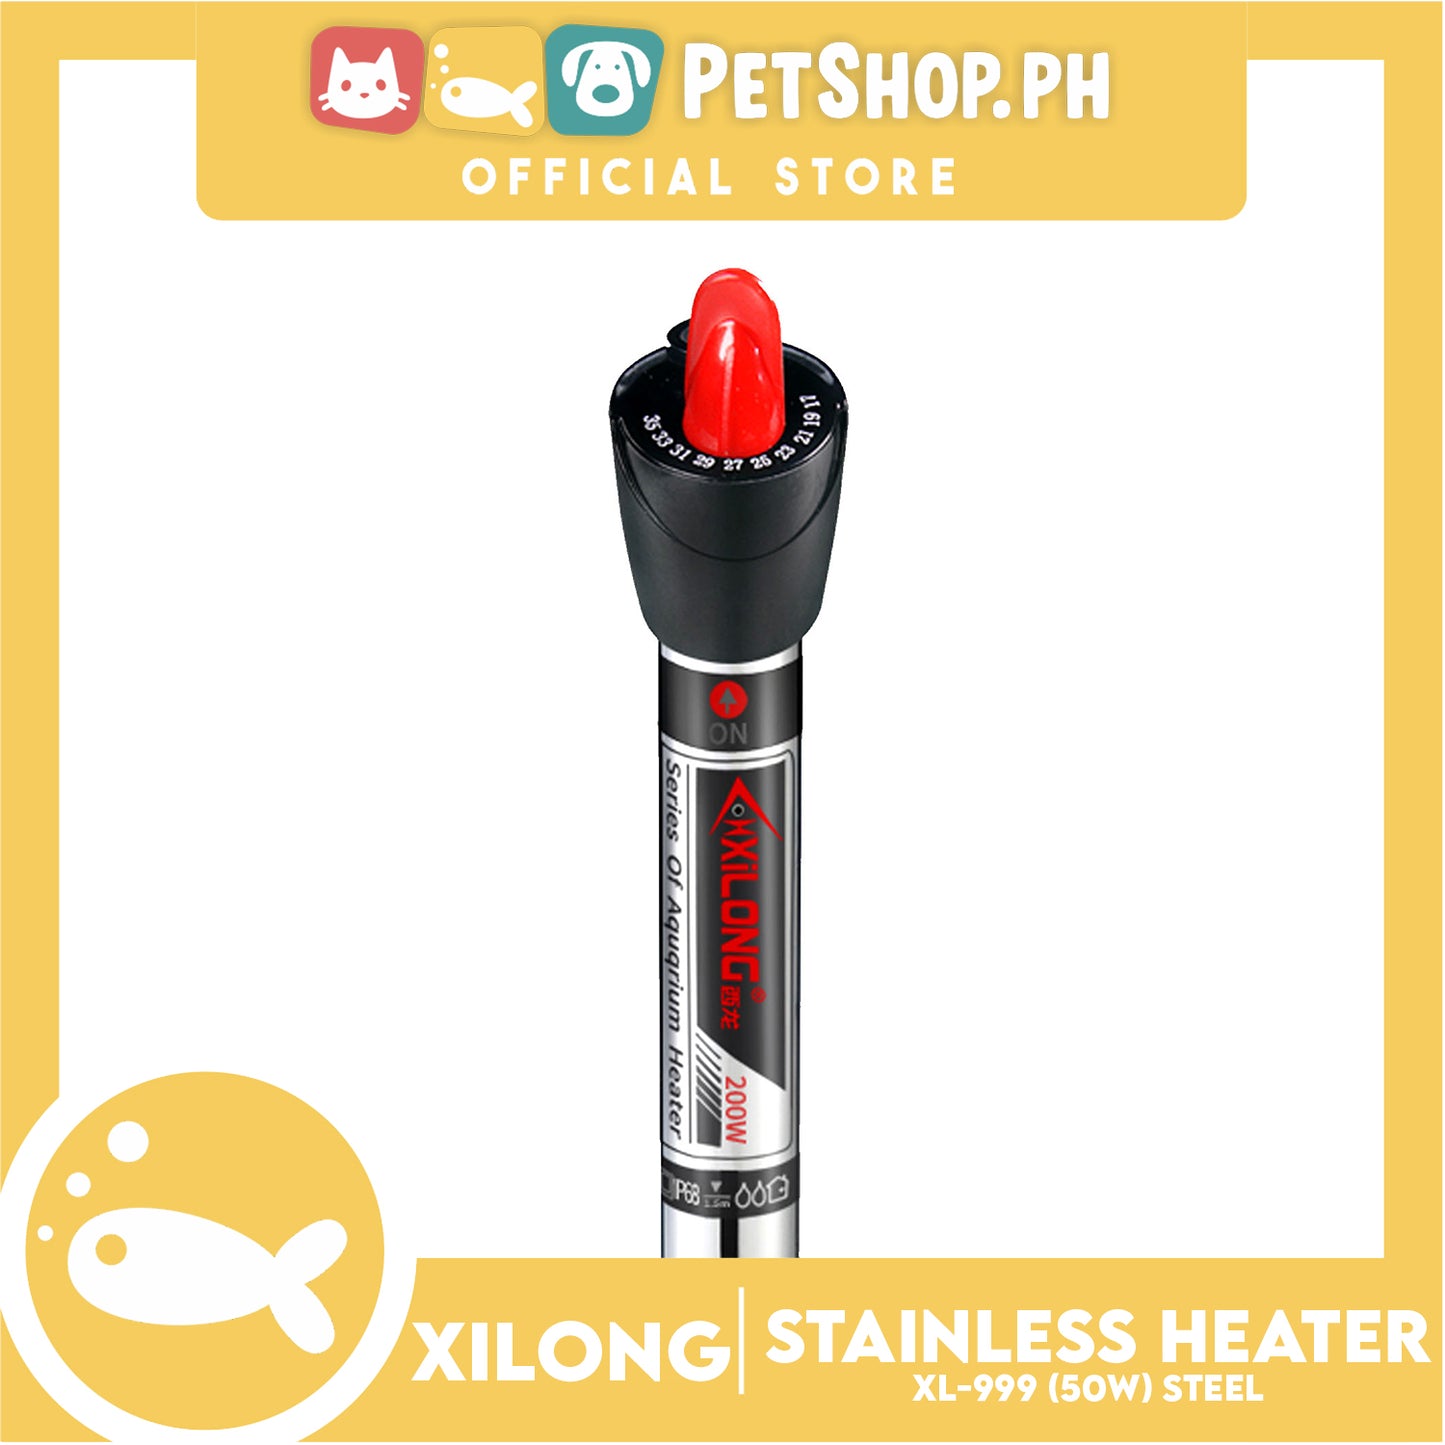 XL-999 Stainless Heater 50w